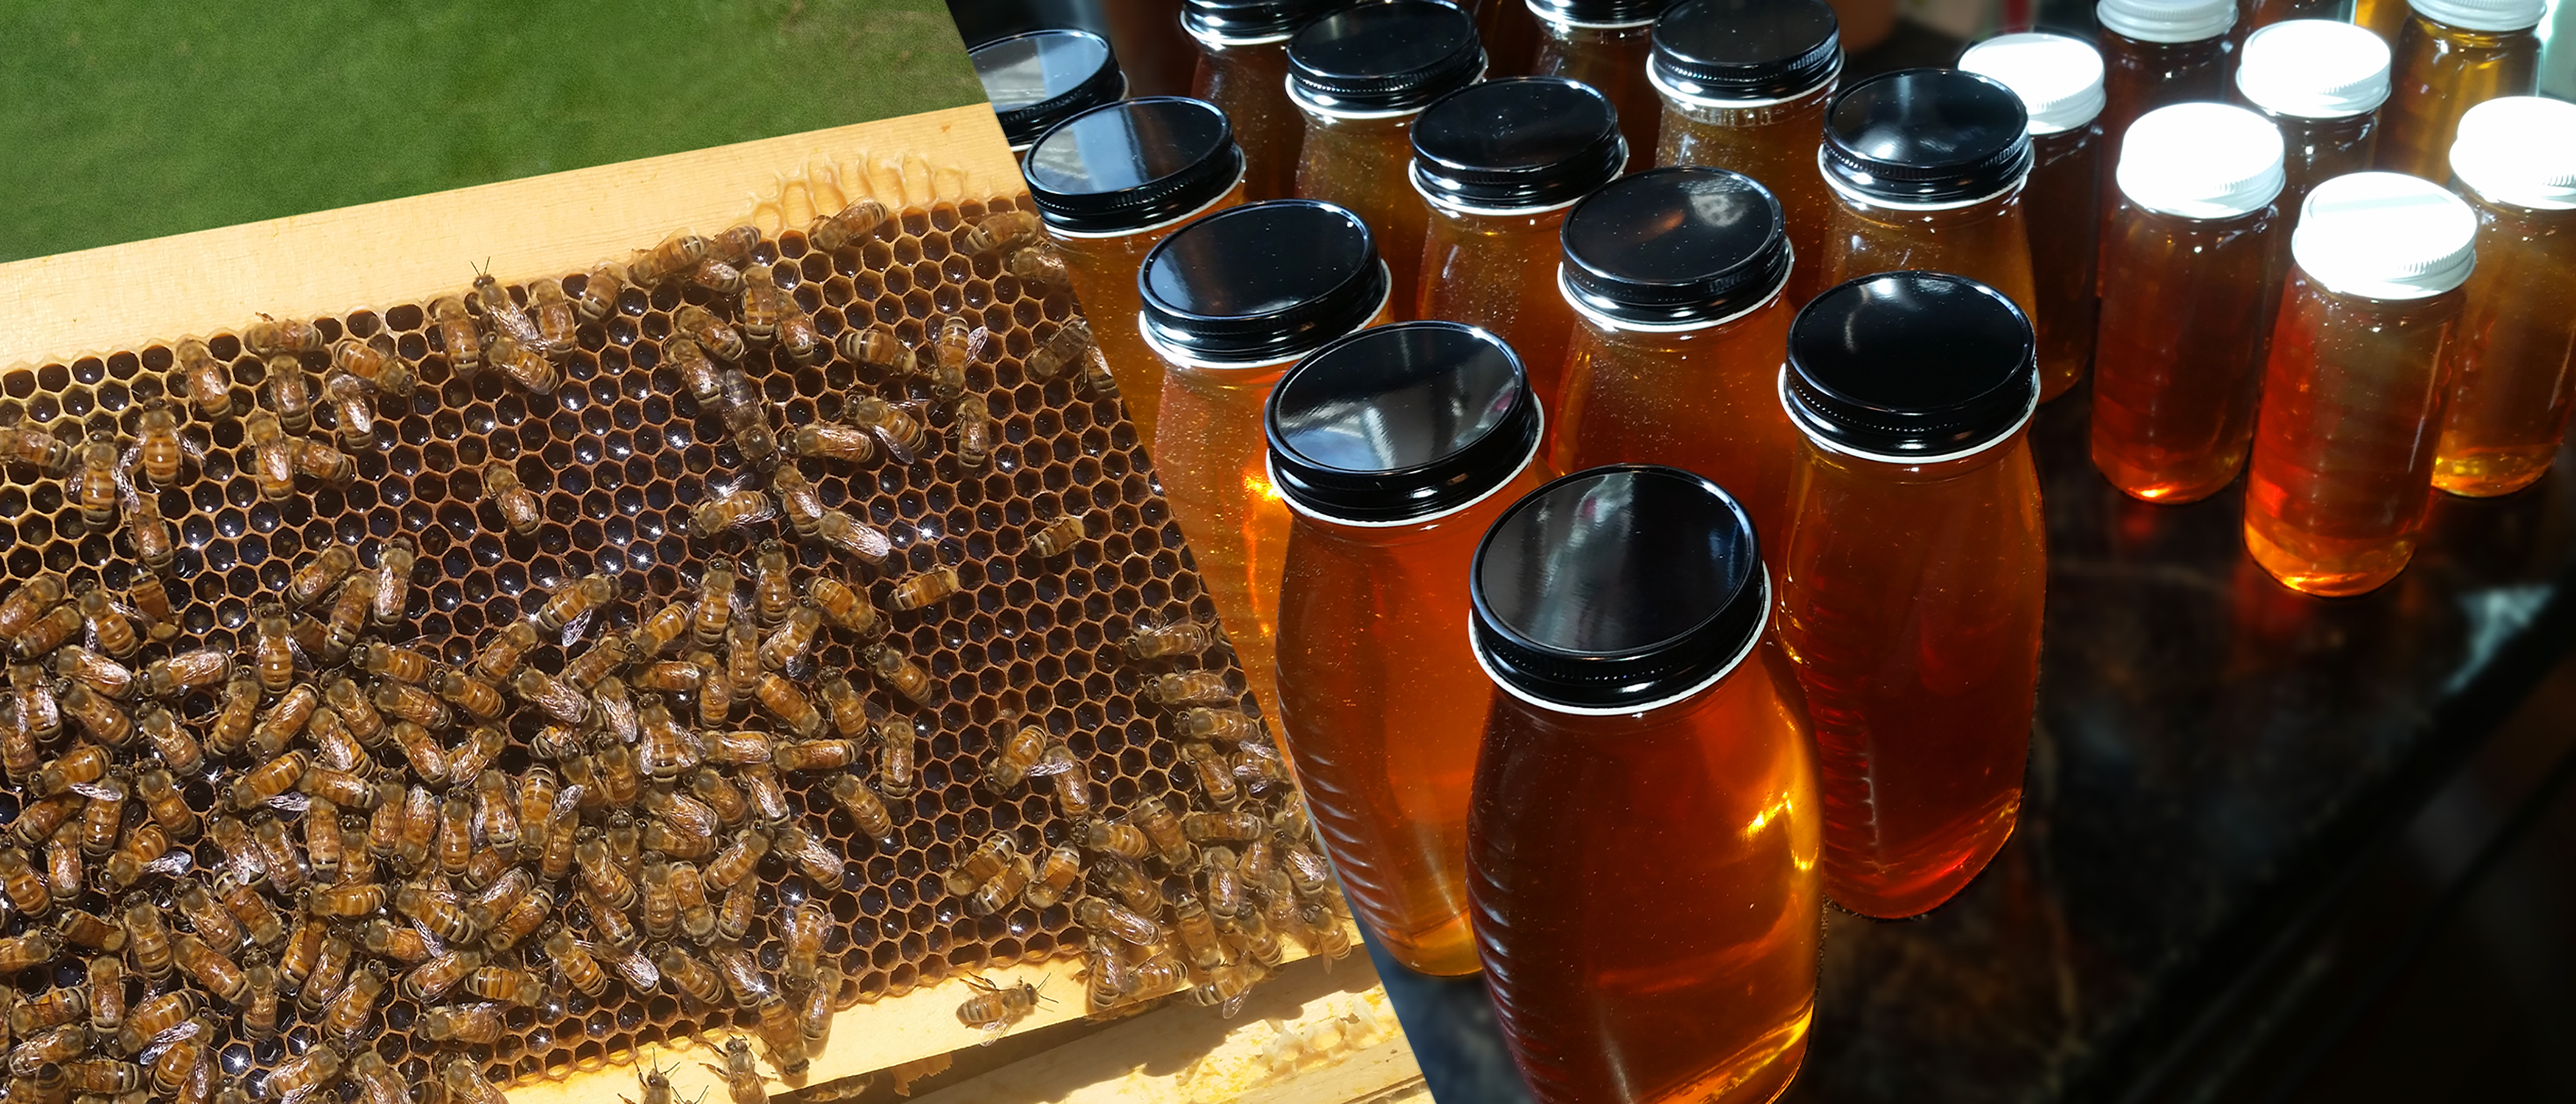 Honey & Hive Products